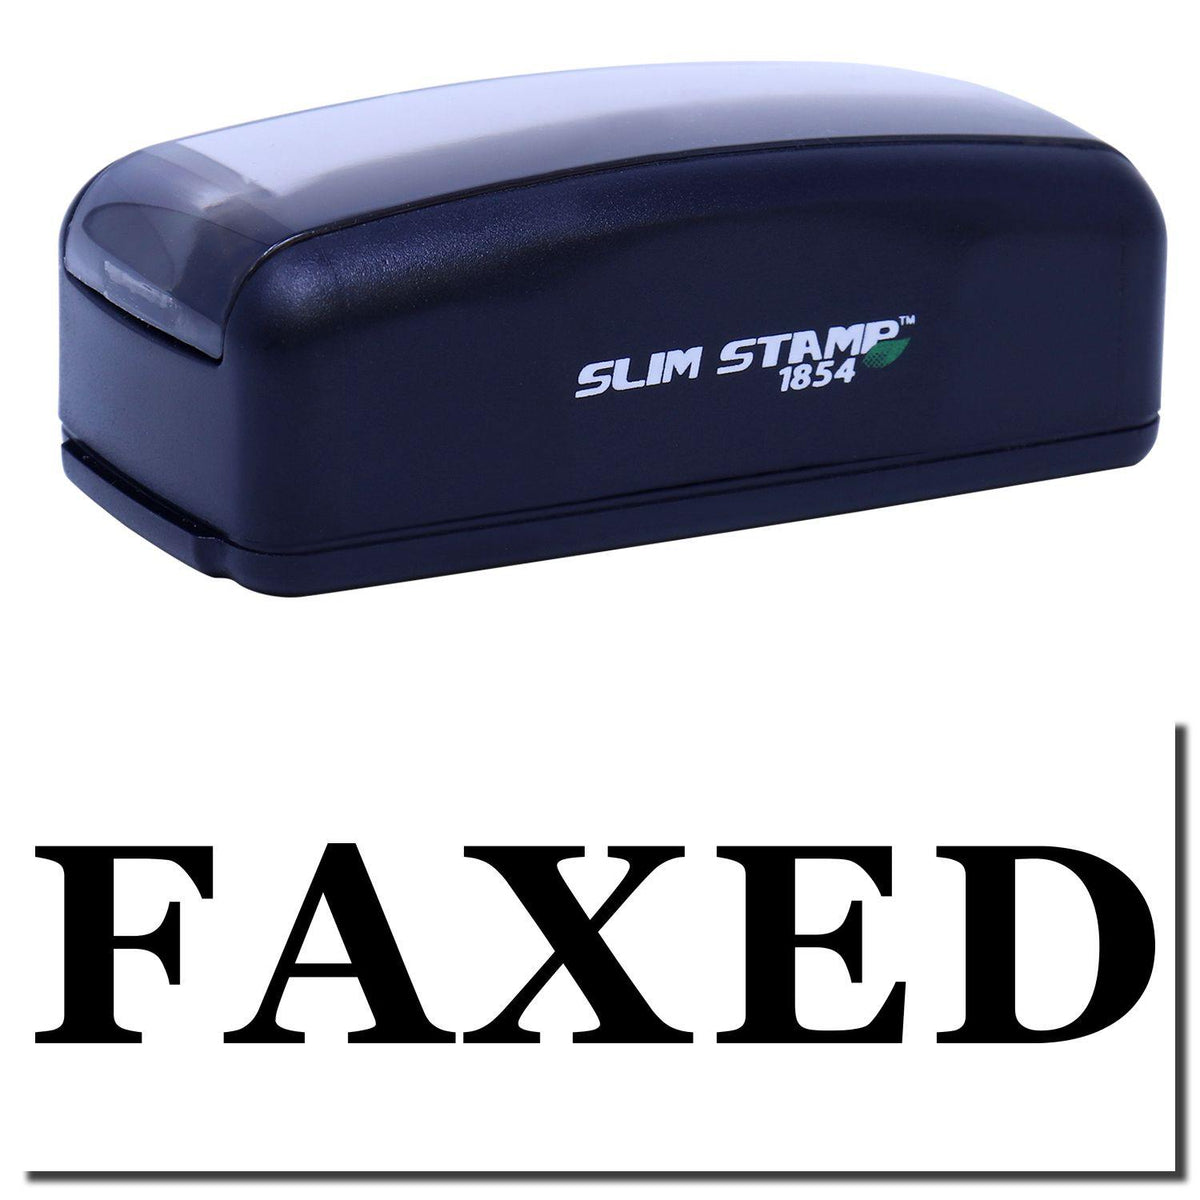 Large Pre-Inked Times Faxed Stamp Main Image